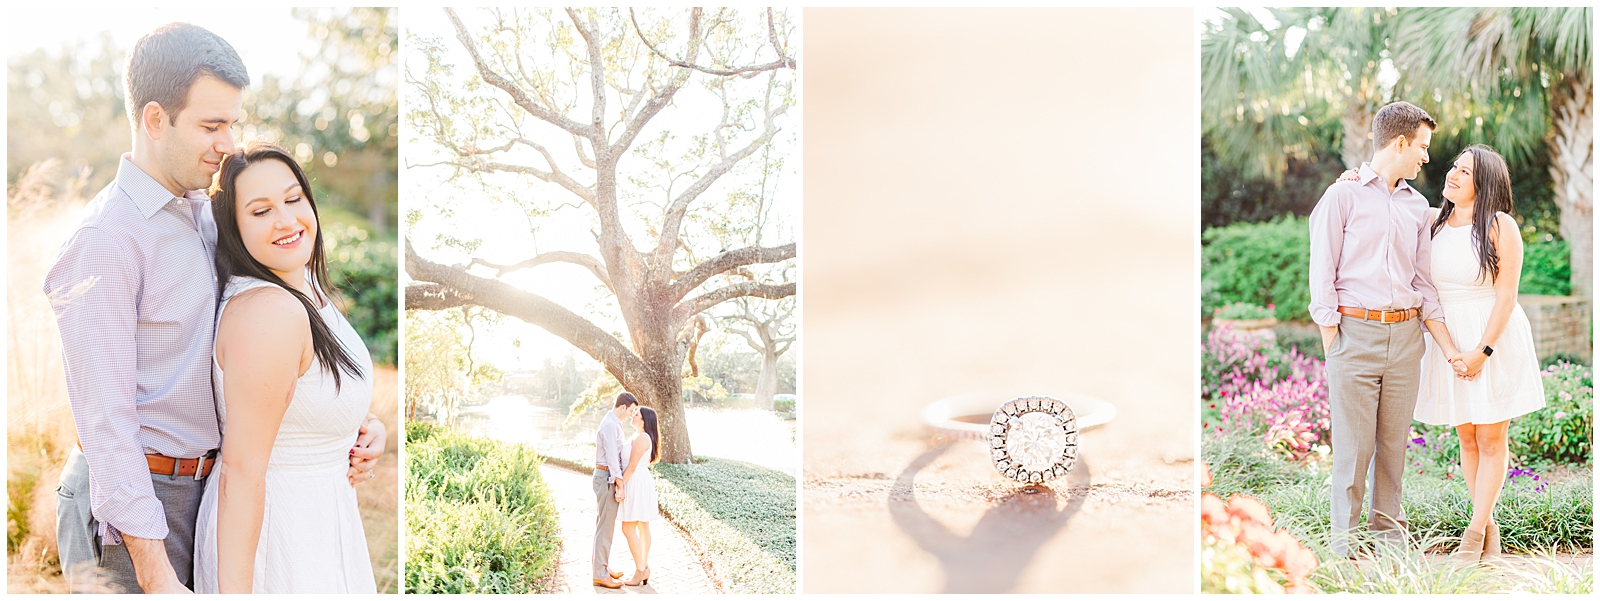 grand hotel point clear alabama engagement session fairhope photographer jennie tewell 0001 1